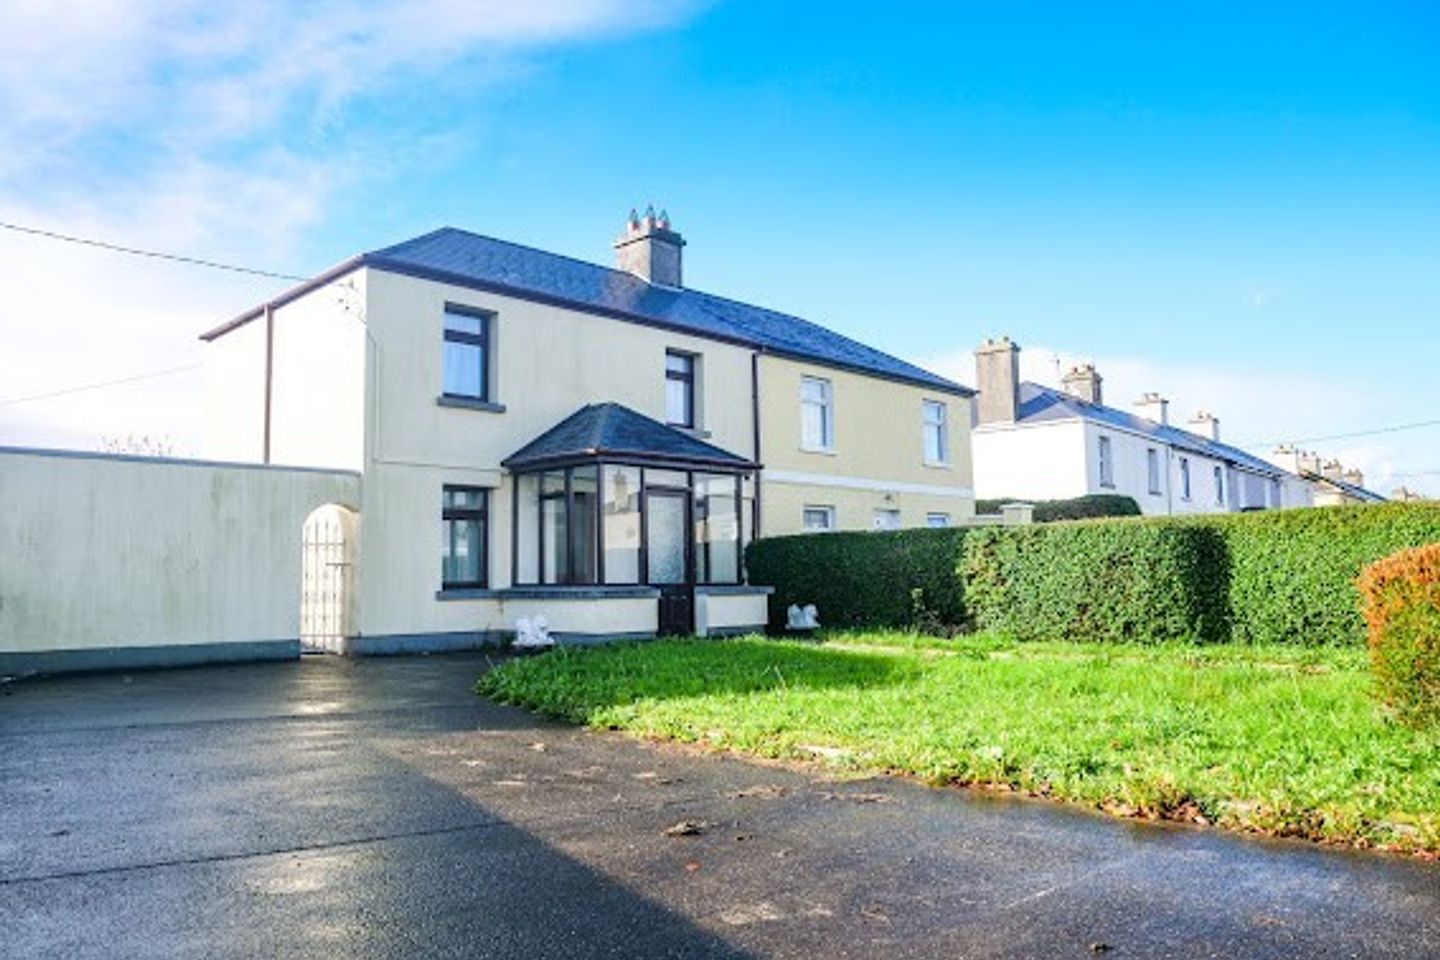 20 Roger Casement Avenue, Tralee, Co. Kerry, V92A62Y